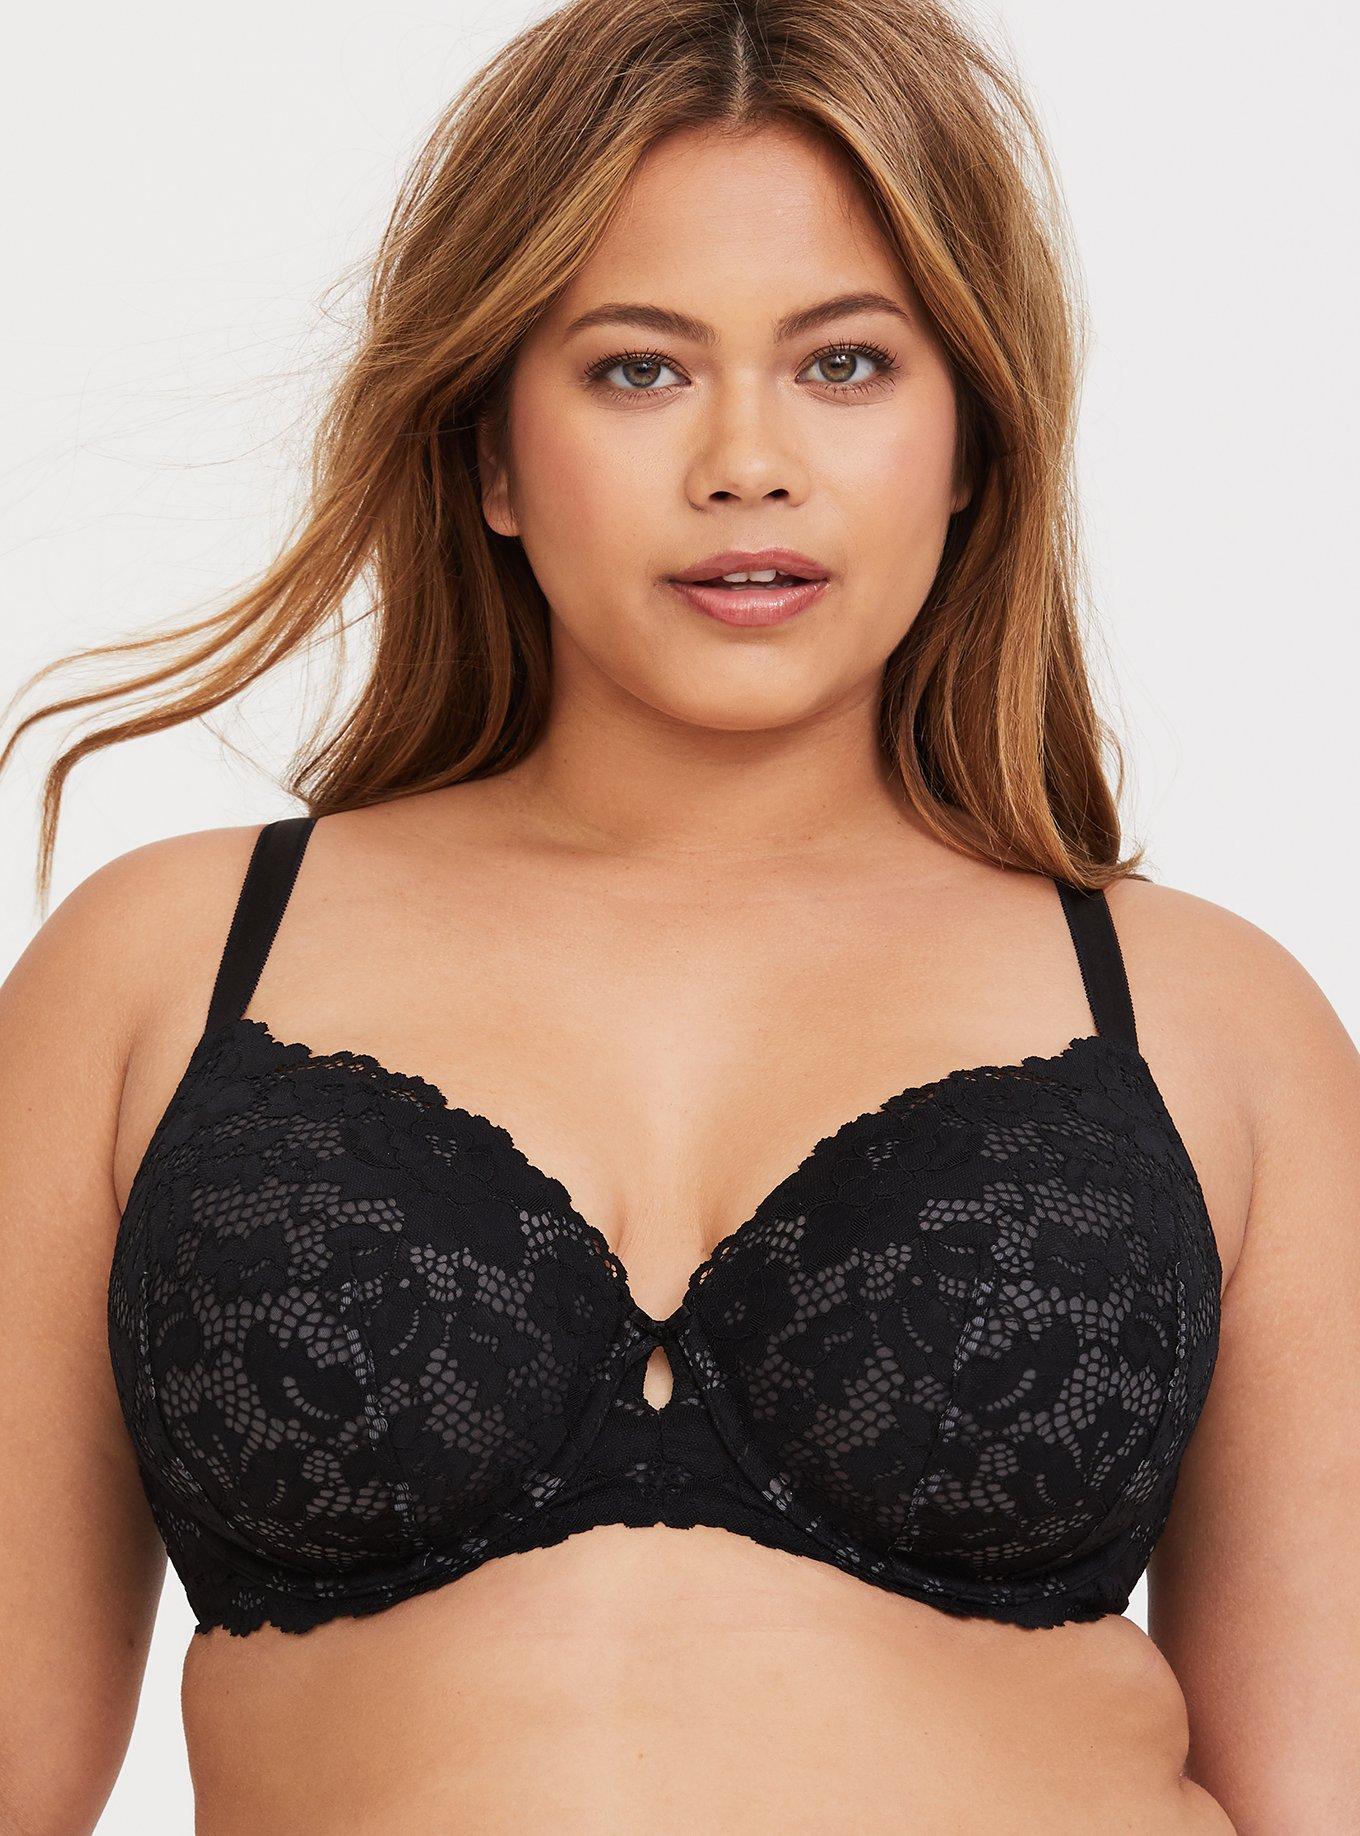 Vermont Country Store Full-Coverage Underwire T-Shirt Bra Black